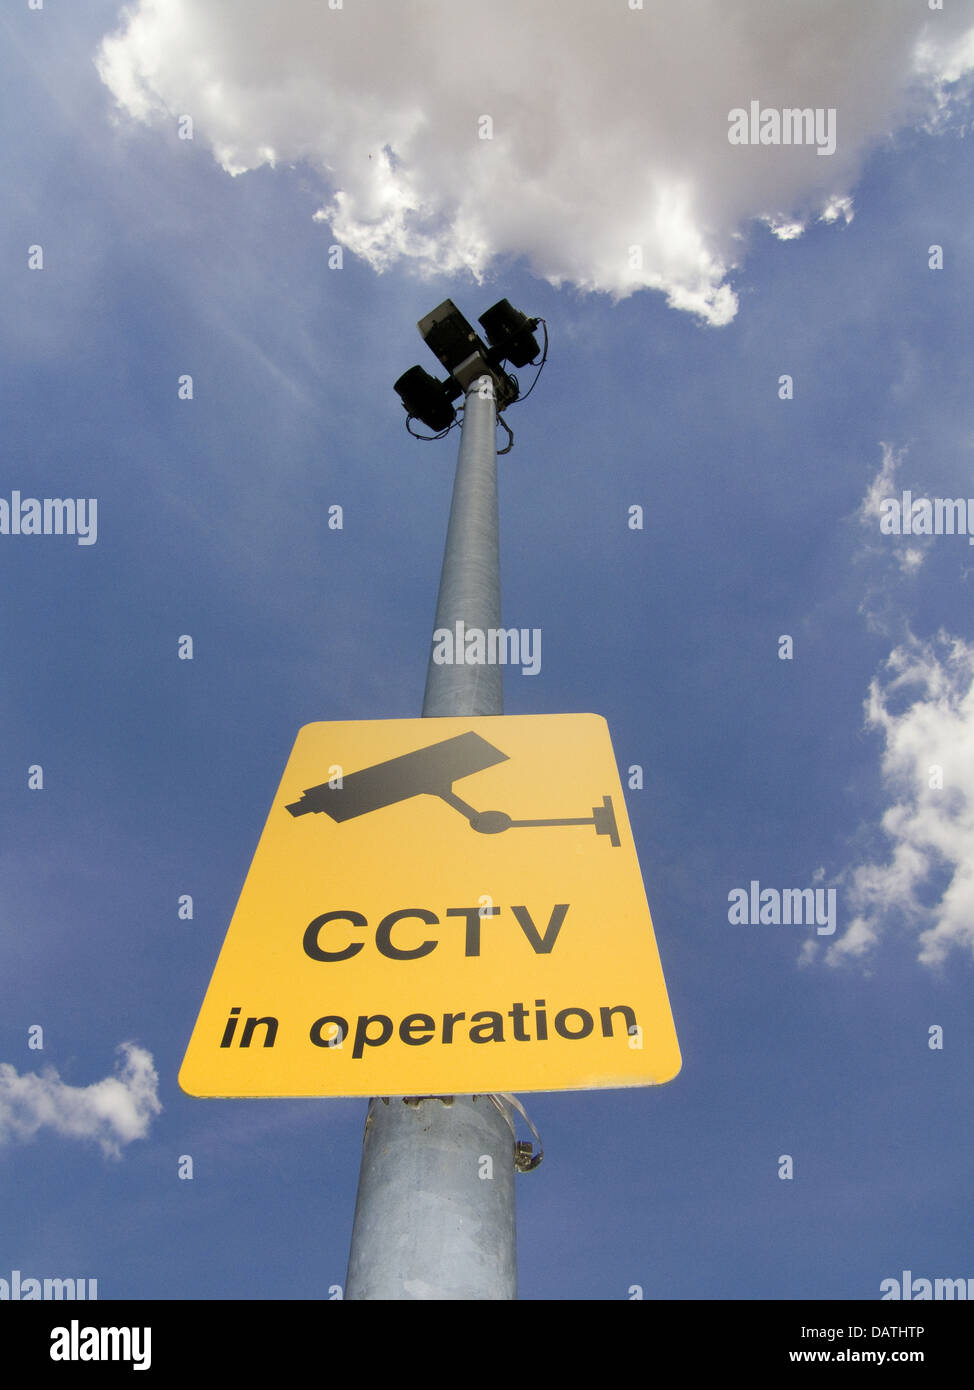 Cctv Sign And Camera On Pole Dramatic Blue Sky With Clouds Stock Photo Alamy